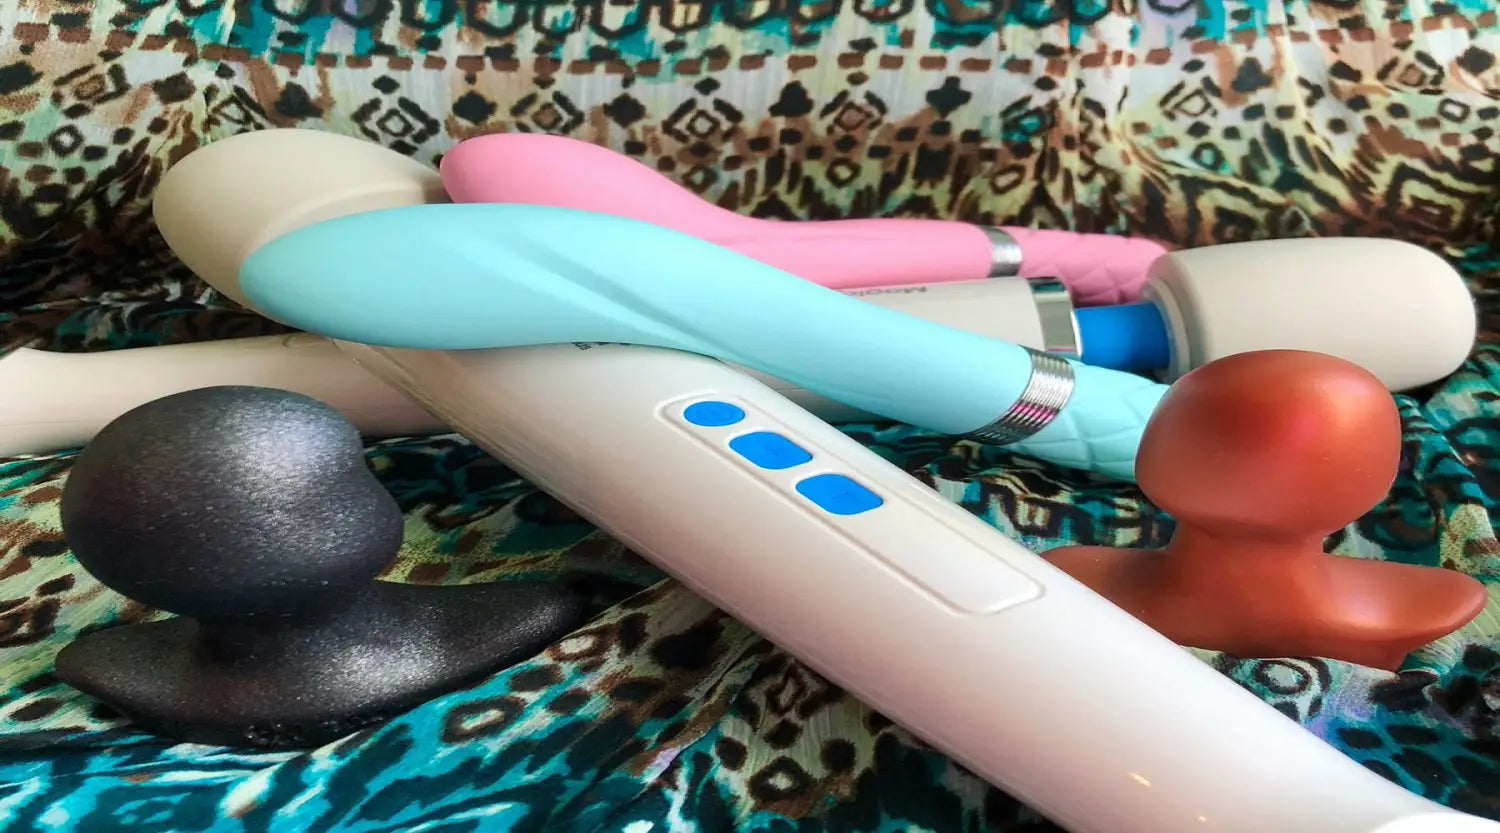 Need help with Your First Sex toy?